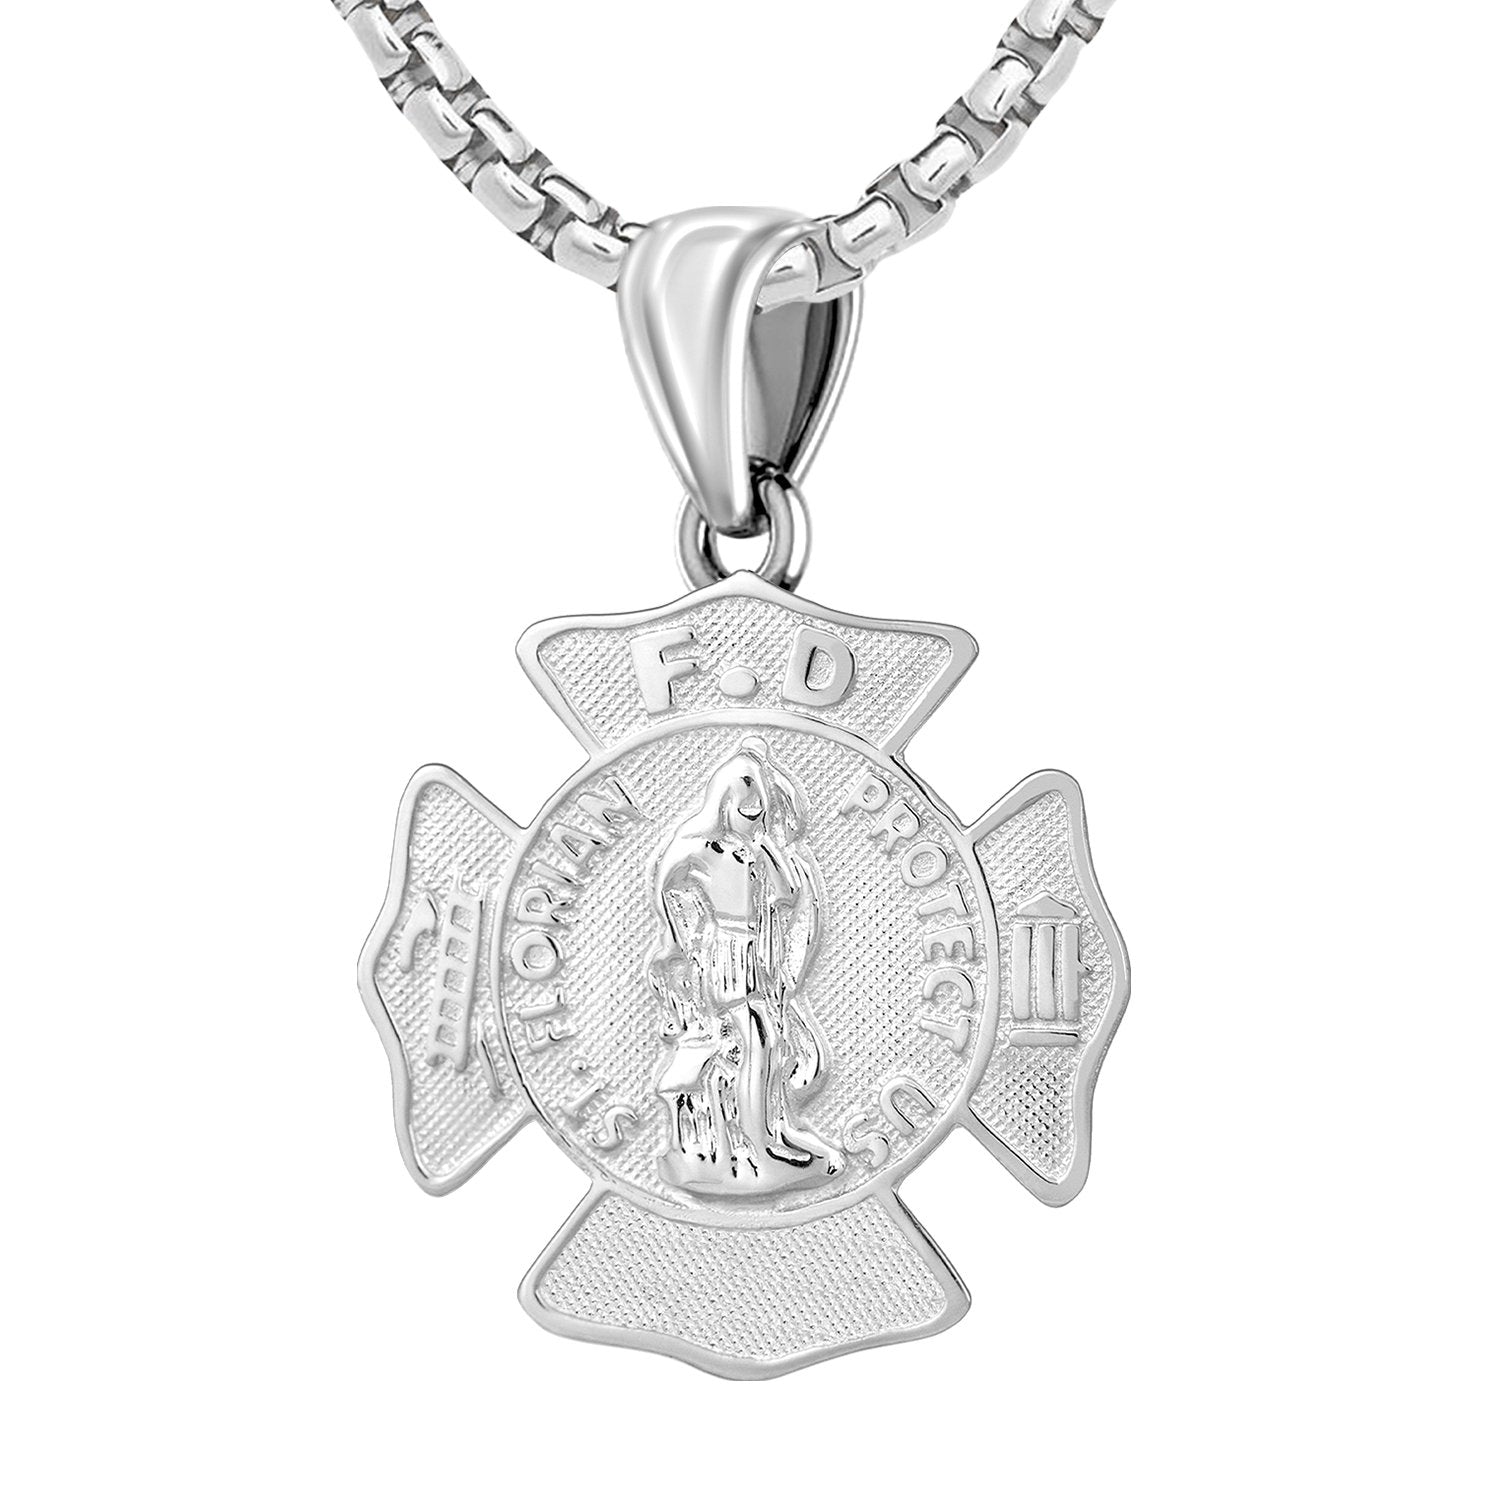 Firefighter Pendant In 925 Silver - 2.6mm Box Chain